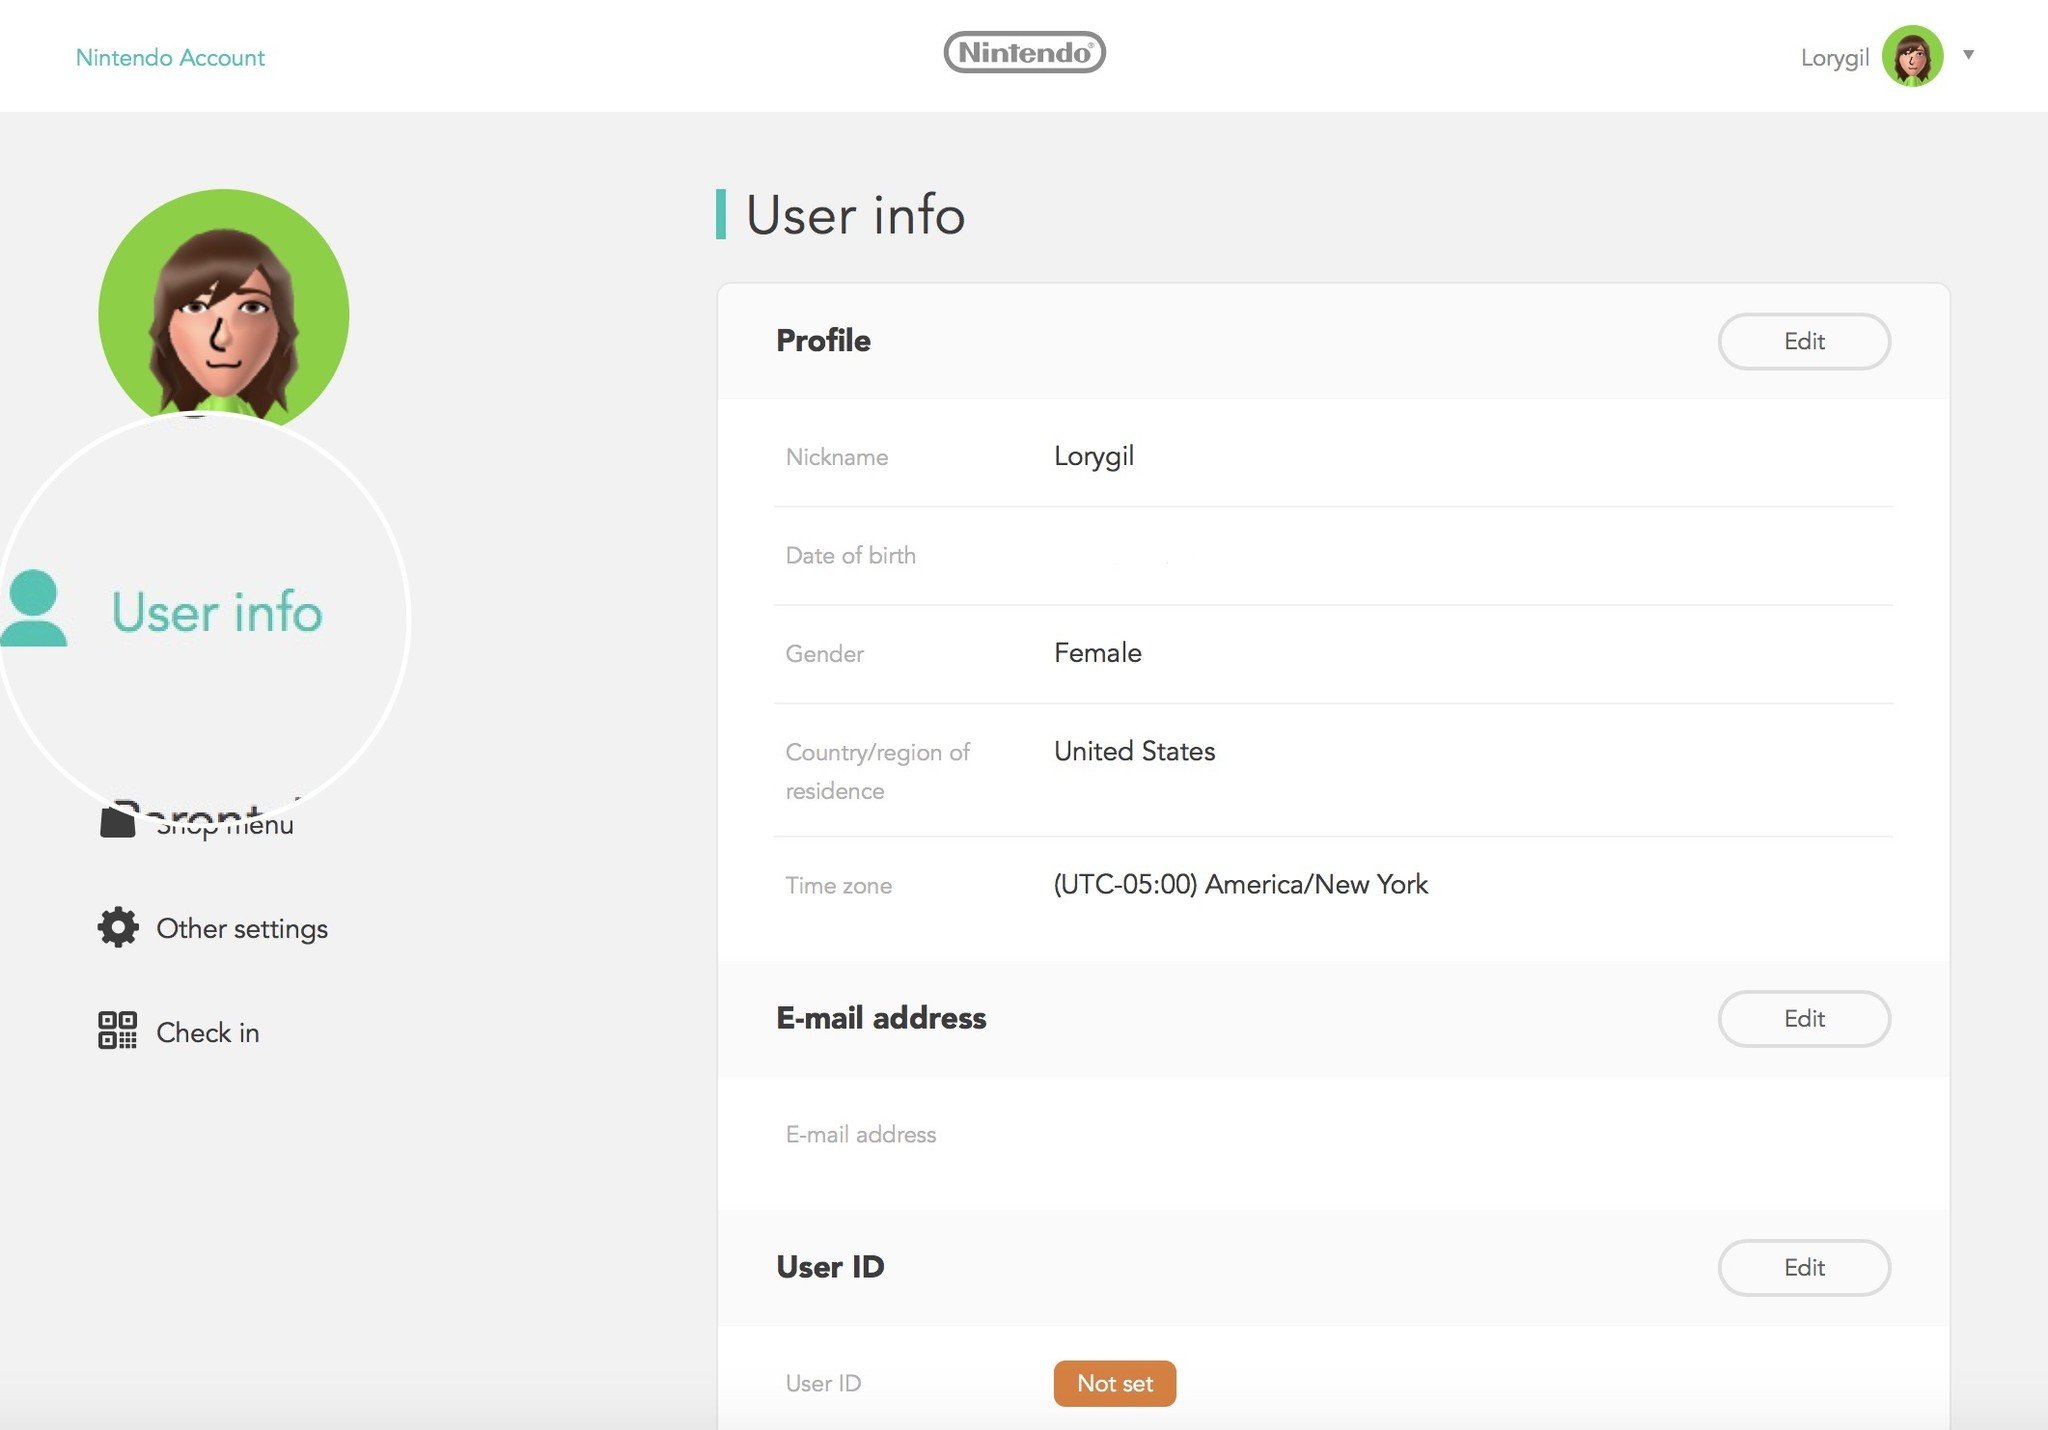 Link Nintendo Network ID to Nintendo Account by selecting User Info on the left side of the screen